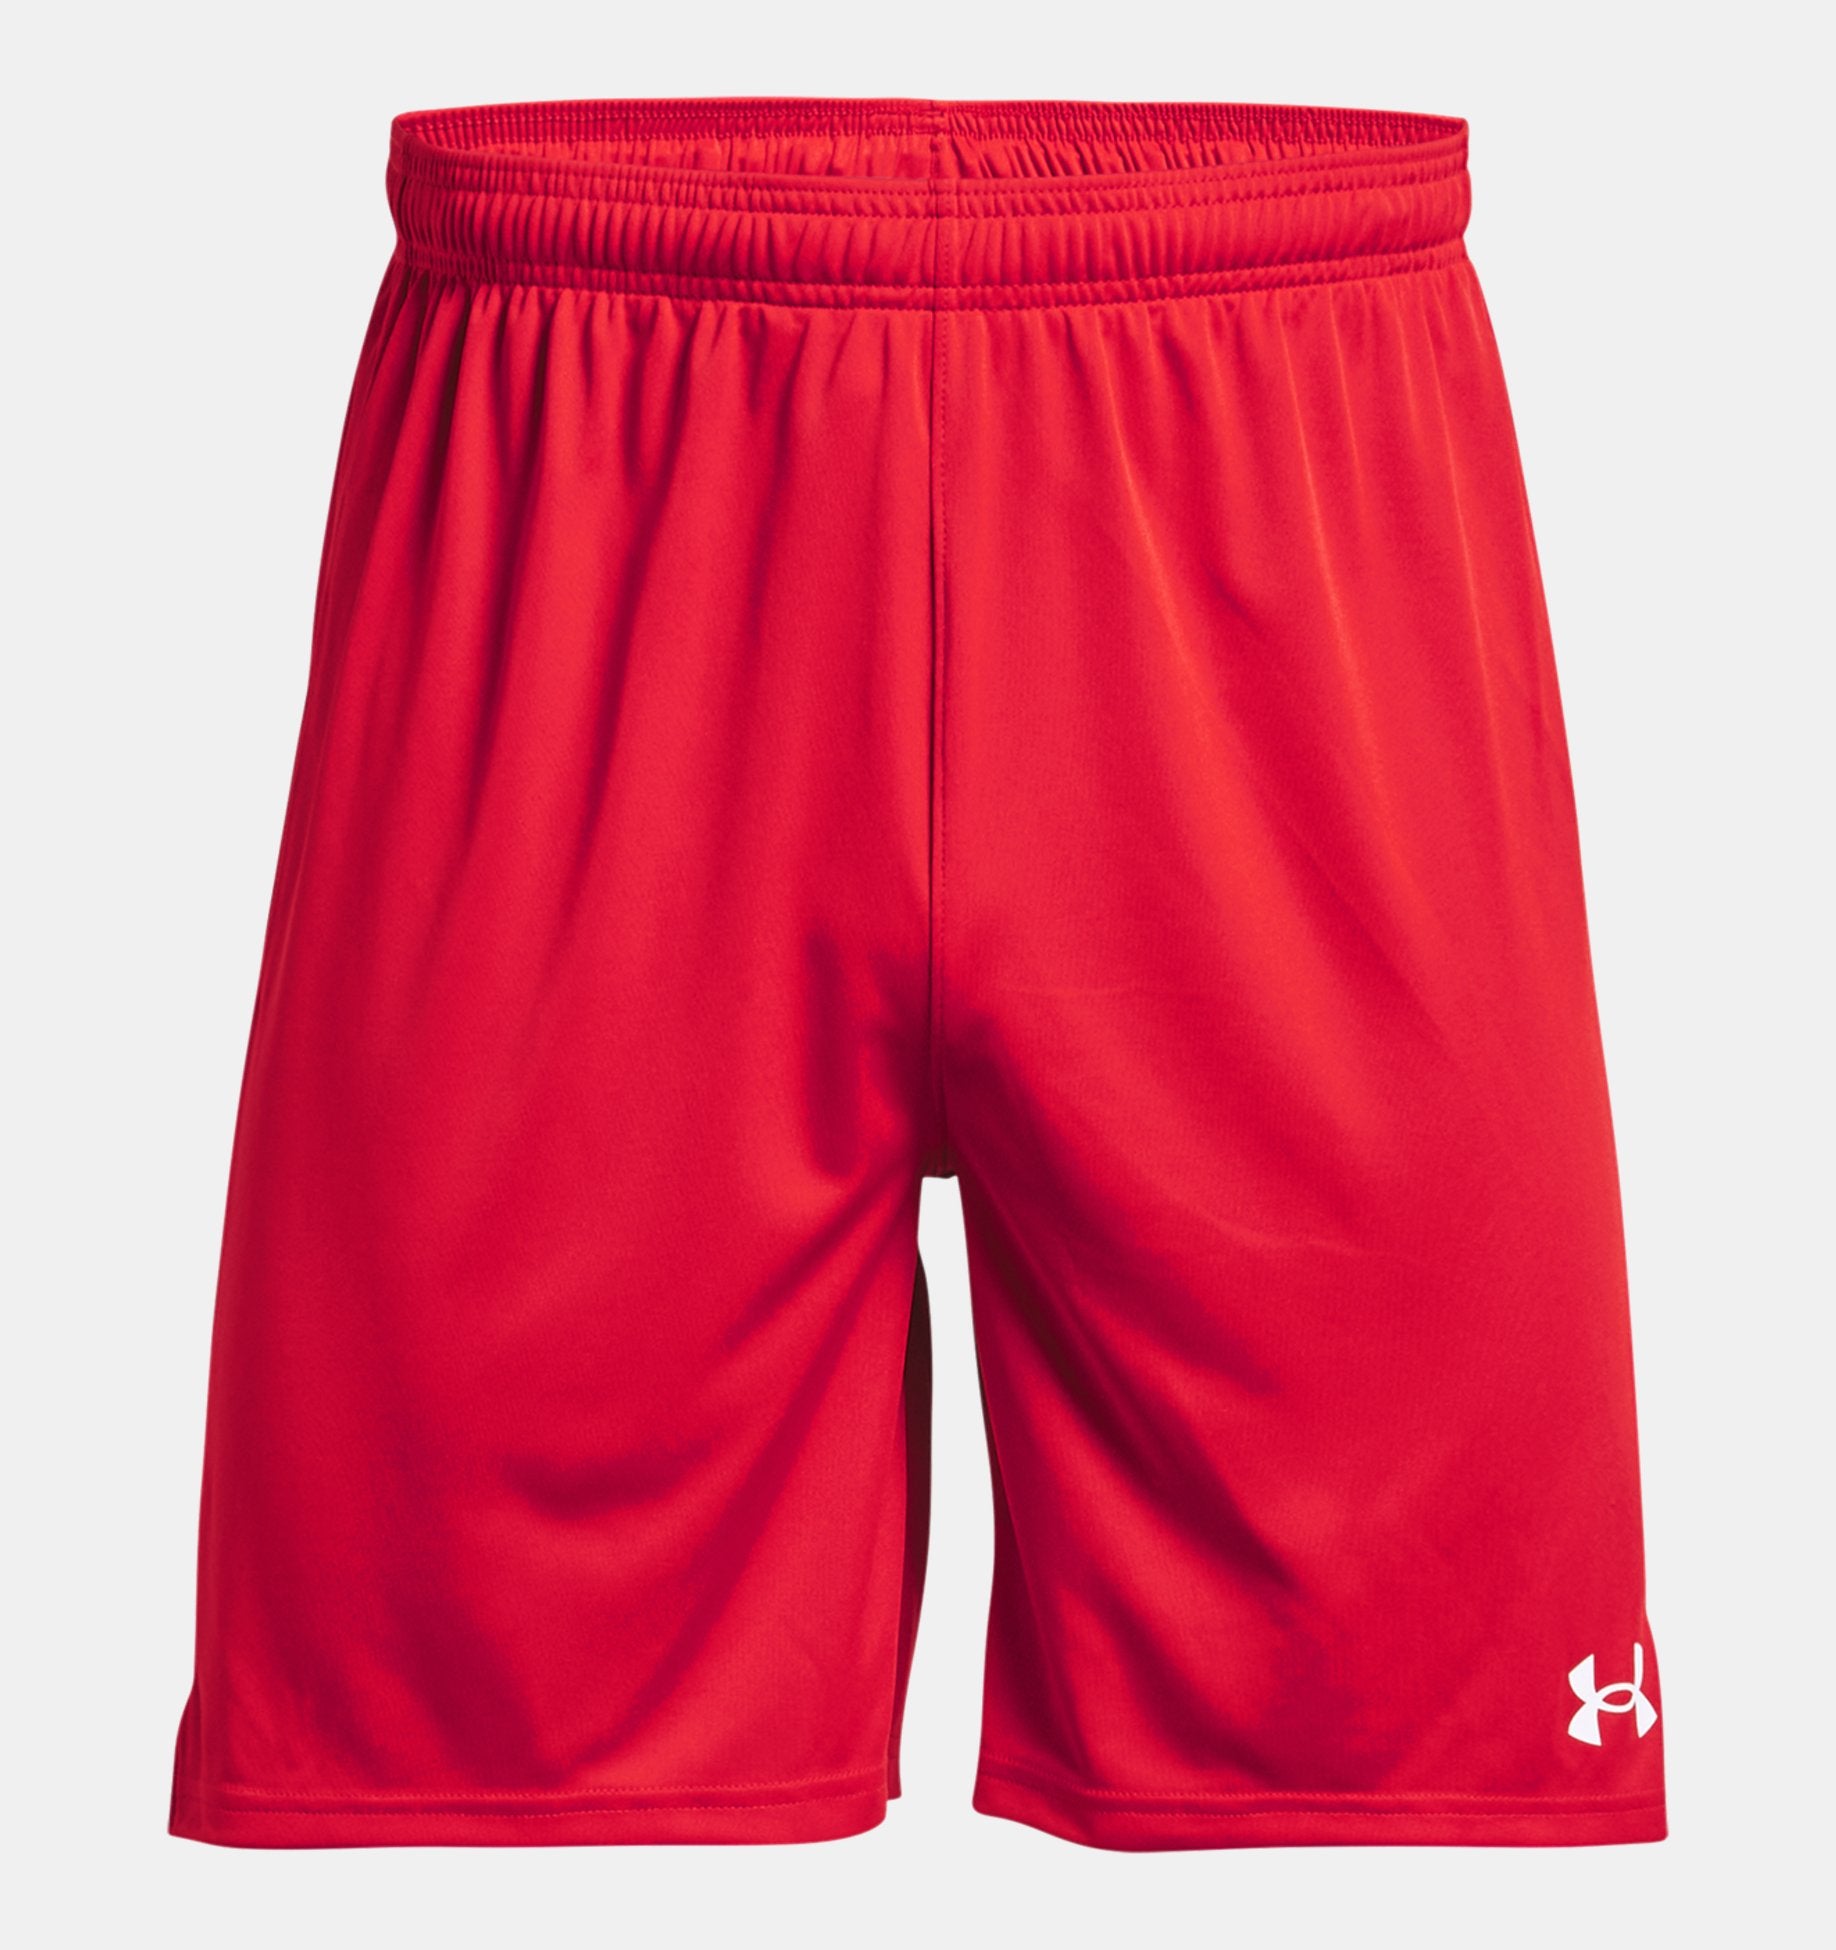 SHORT-SPORT-HOMME-GOLAZO-3.0-ROUGE-UNDER-ARMOUR-1369058-RED-MAHEU-GO-SPORT-06